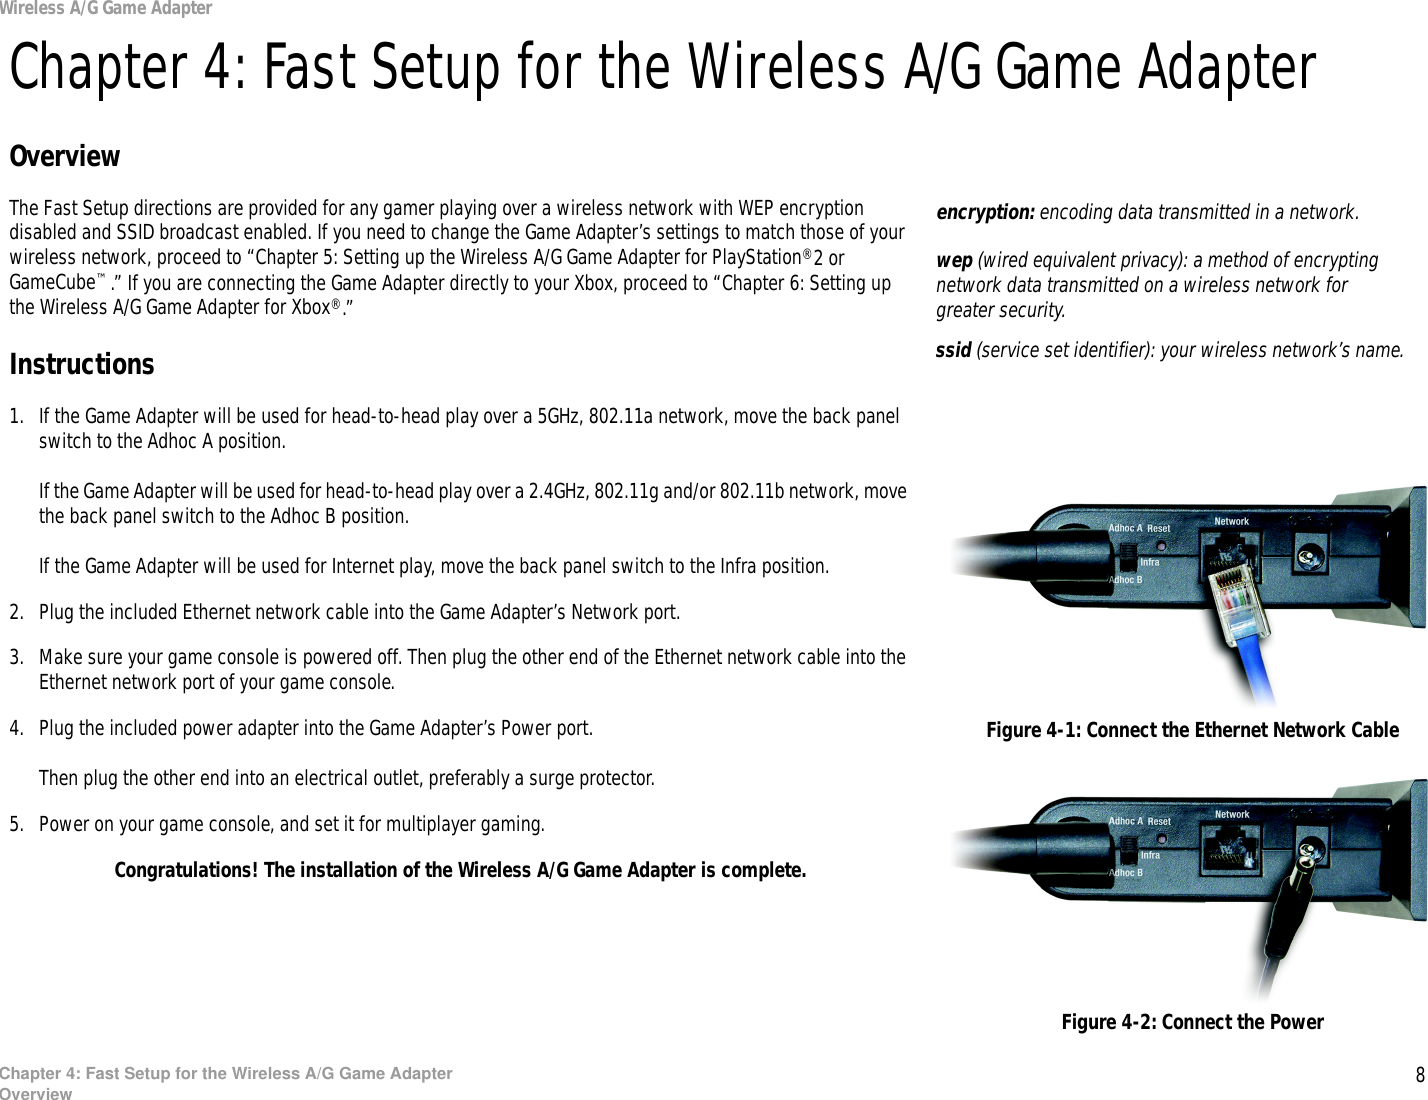 8Chapter 4: Fast Setup for the Wireless A/G Game AdapterOverviewWireless A/G Game AdapterChapter 4: Fast Setup for the Wireless A/G Game AdapterOverviewThe Fast Setup directions are provided for any gamer playing over a wireless network with WEP encryption disabled and SSID broadcast enabled. If you need to change the Game Adapter’s settings to match those of your wireless network, proceed to “Chapter 5: Setting up the Wireless A/G Game Adapter for PlayStation®2 or GameCube™.” If you are connecting the Game Adapter directly to your Xbox, proceed to “Chapter 6: Setting up the Wireless A/G Game Adapter for Xbox®.”Instructions1. If the Game Adapter will be used for head-to-head play over a 5GHz, 802.11a network, move the back panel switch to the Adhoc A position.If the Game Adapter will be used for head-to-head play over a 2.4GHz, 802.11g and/or 802.11b network, move the back panel switch to the Adhoc B position.If the Game Adapter will be used for Internet play, move the back panel switch to the Infra position.2. Plug the included Ethernet network cable into the Game Adapter’s Network port.3. Make sure your game console is powered off. Then plug the other end of the Ethernet network cable into the Ethernet network port of your game console.4. Plug the included power adapter into the Game Adapter’s Power port.Then plug the other end into an electrical outlet, preferably a surge protector.5. Power on your game console, and set it for multiplayer gaming.Congratulations! The installation of the Wireless A/G Game Adapter is complete.Figure 4-1: Connect the Ethernet Network CableFigure 4-2: Connect the Powerencryption: encoding data transmitted in a network.wep (wired equivalent privacy): a method of encrypting network data transmitted on a wireless network for greater security.ssid (service set identifier): your wireless network’s name.